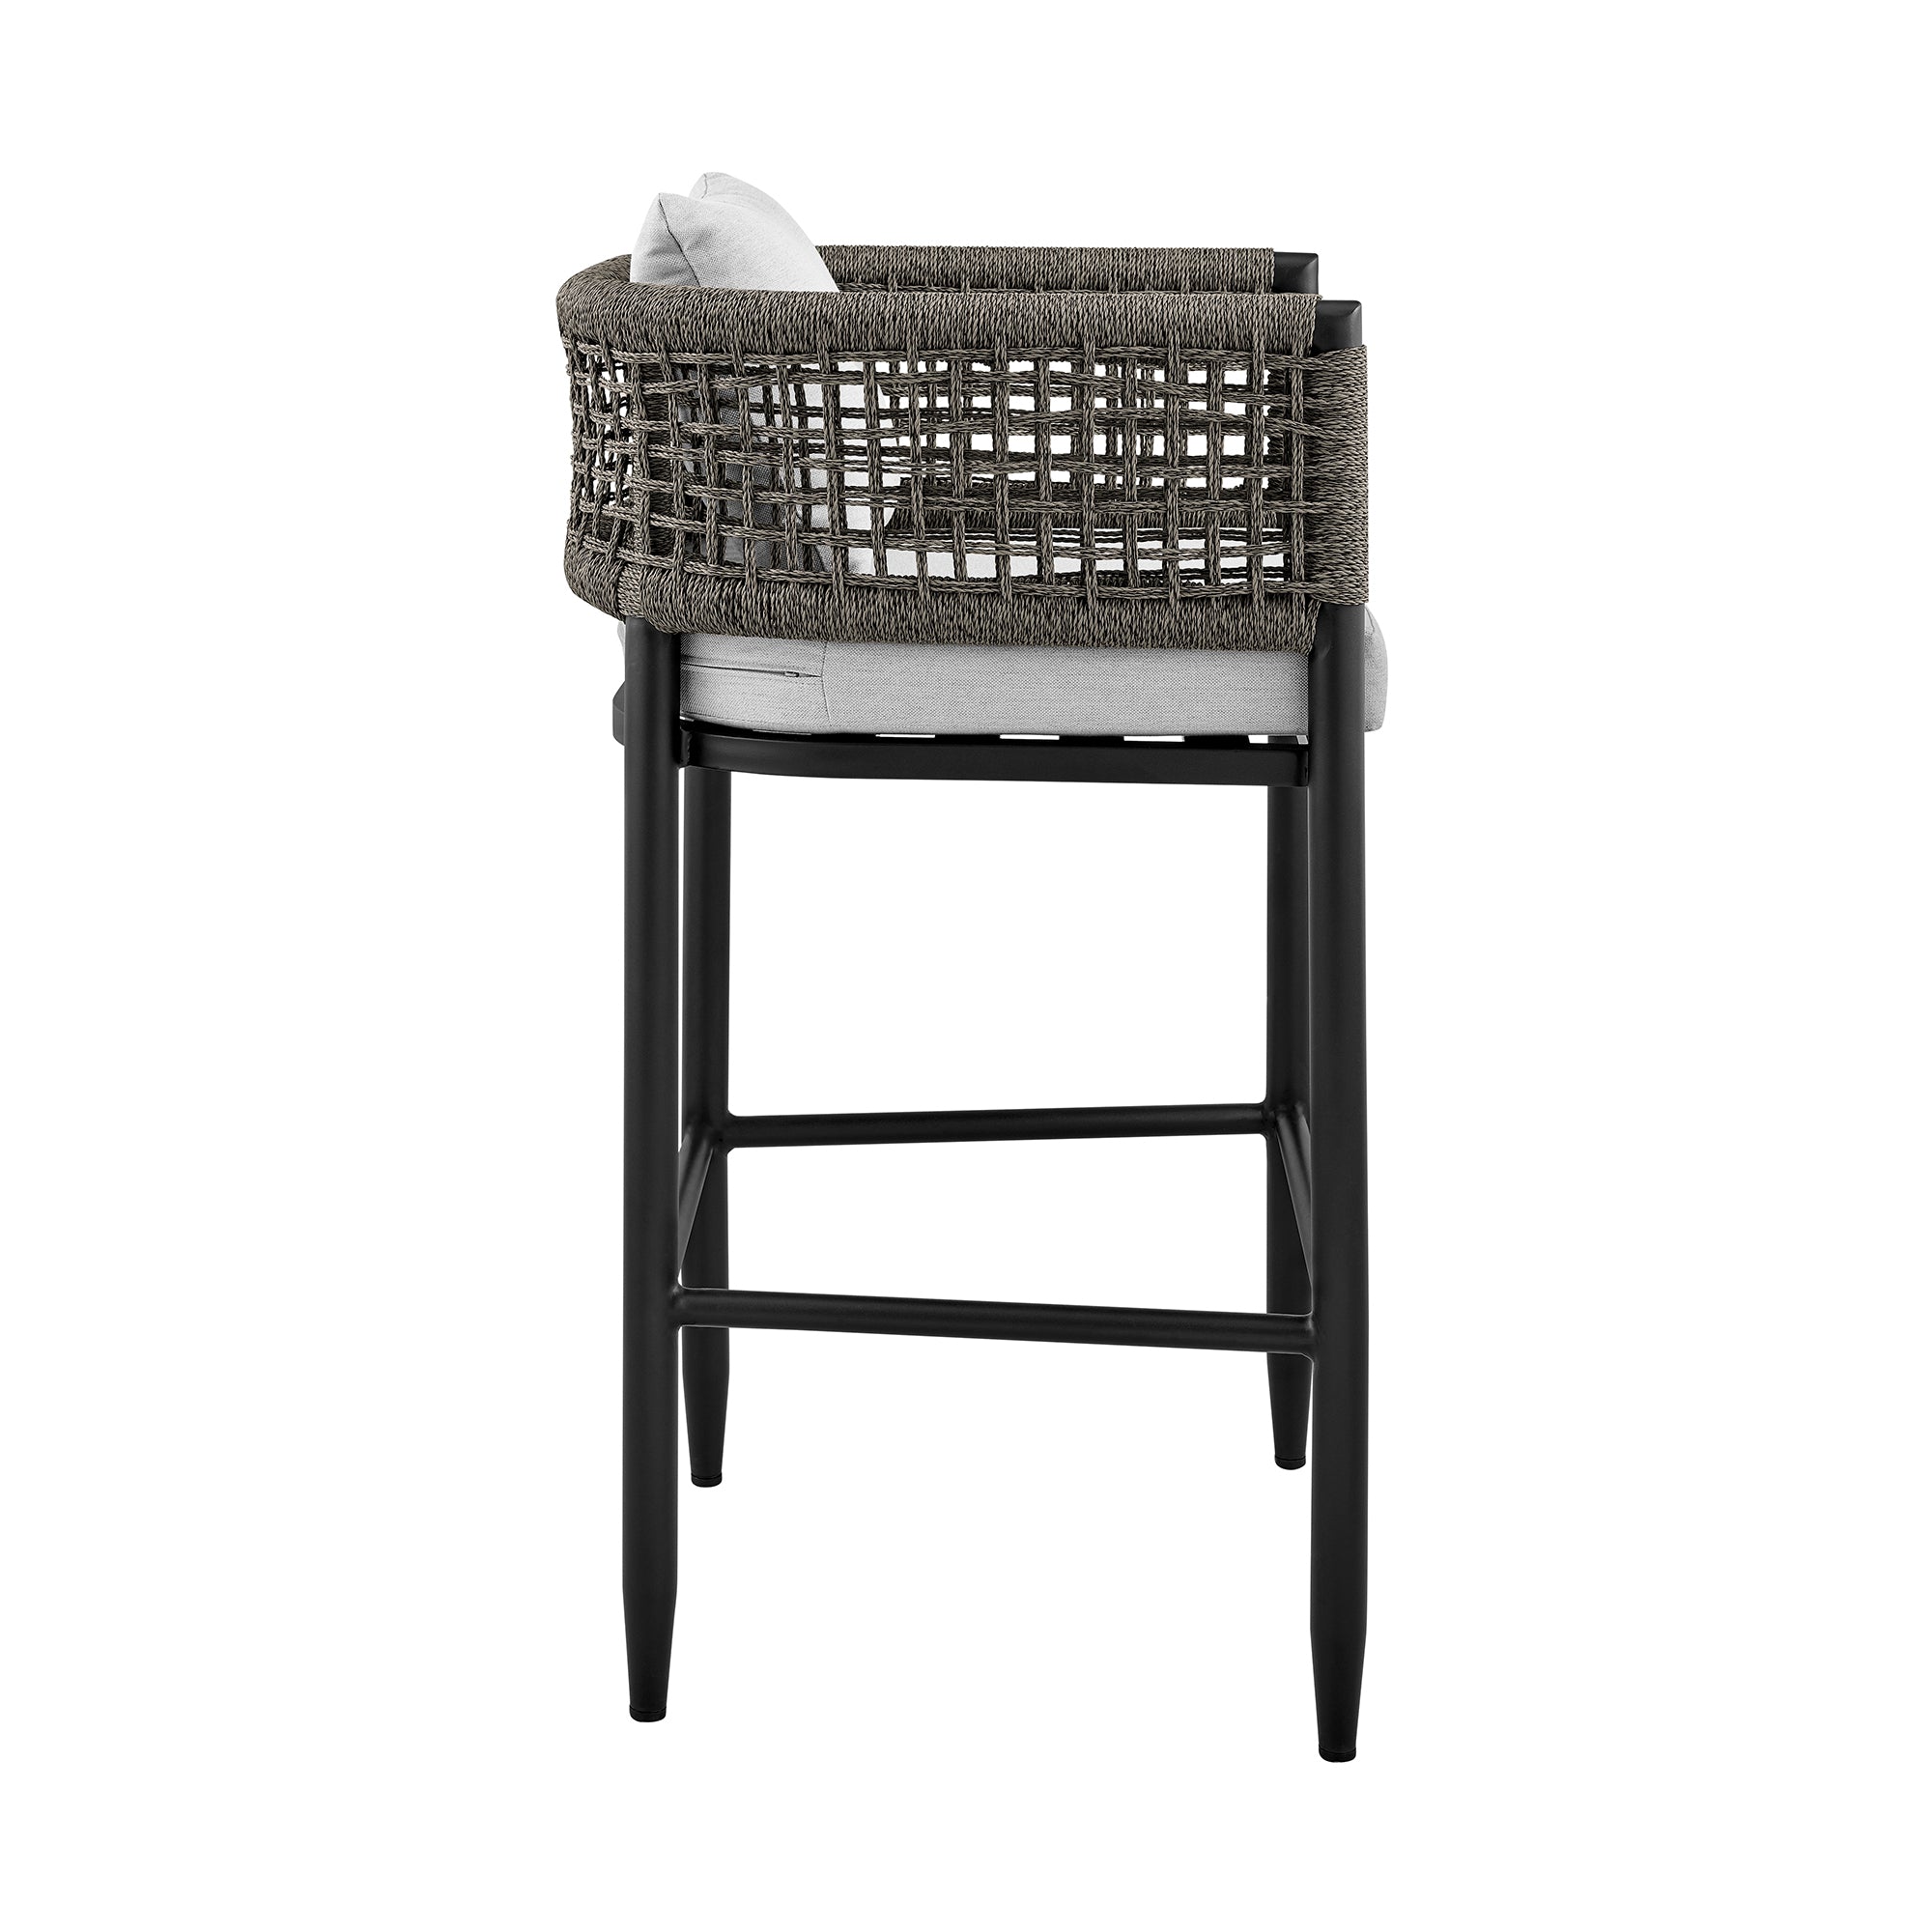 Armen Living - Felicia Outdoor Patio Counter or Bar Height Bar Stool in Aluminum with Grey Rope and Cushions - 840254333116